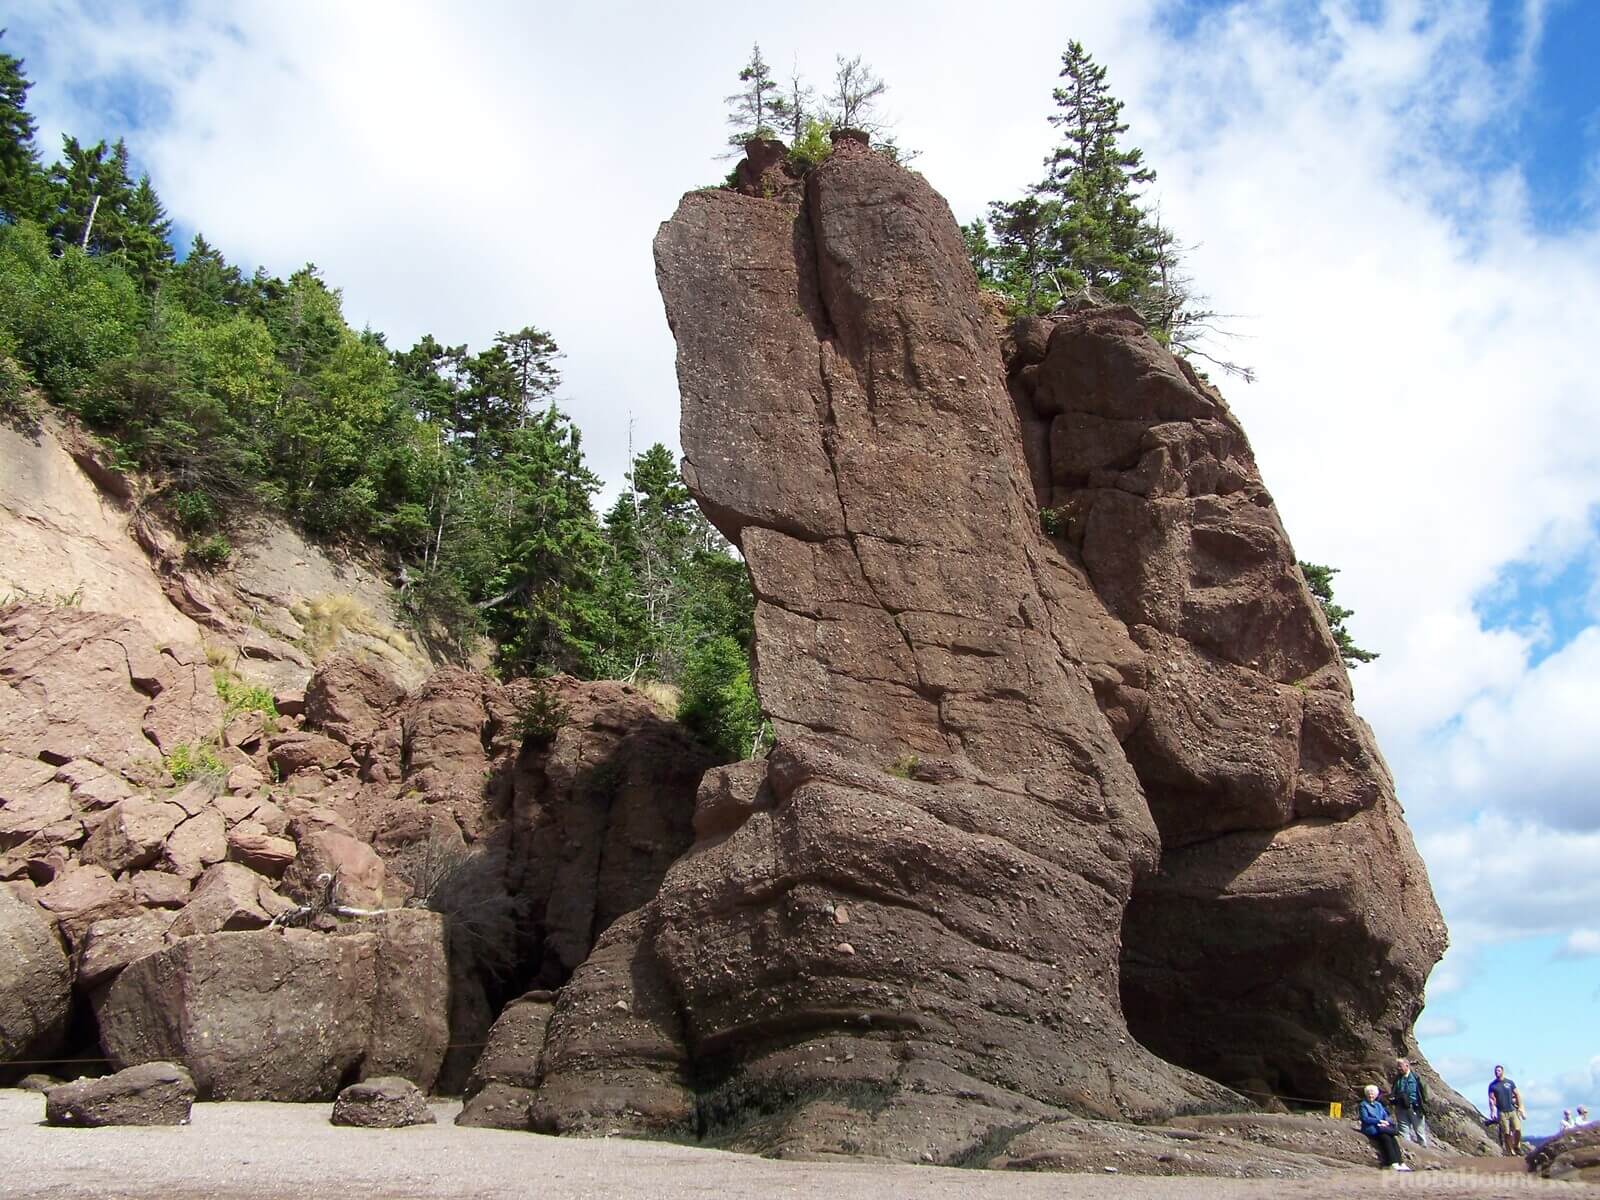 Image of Hopewell Rocks by Paul Thistle